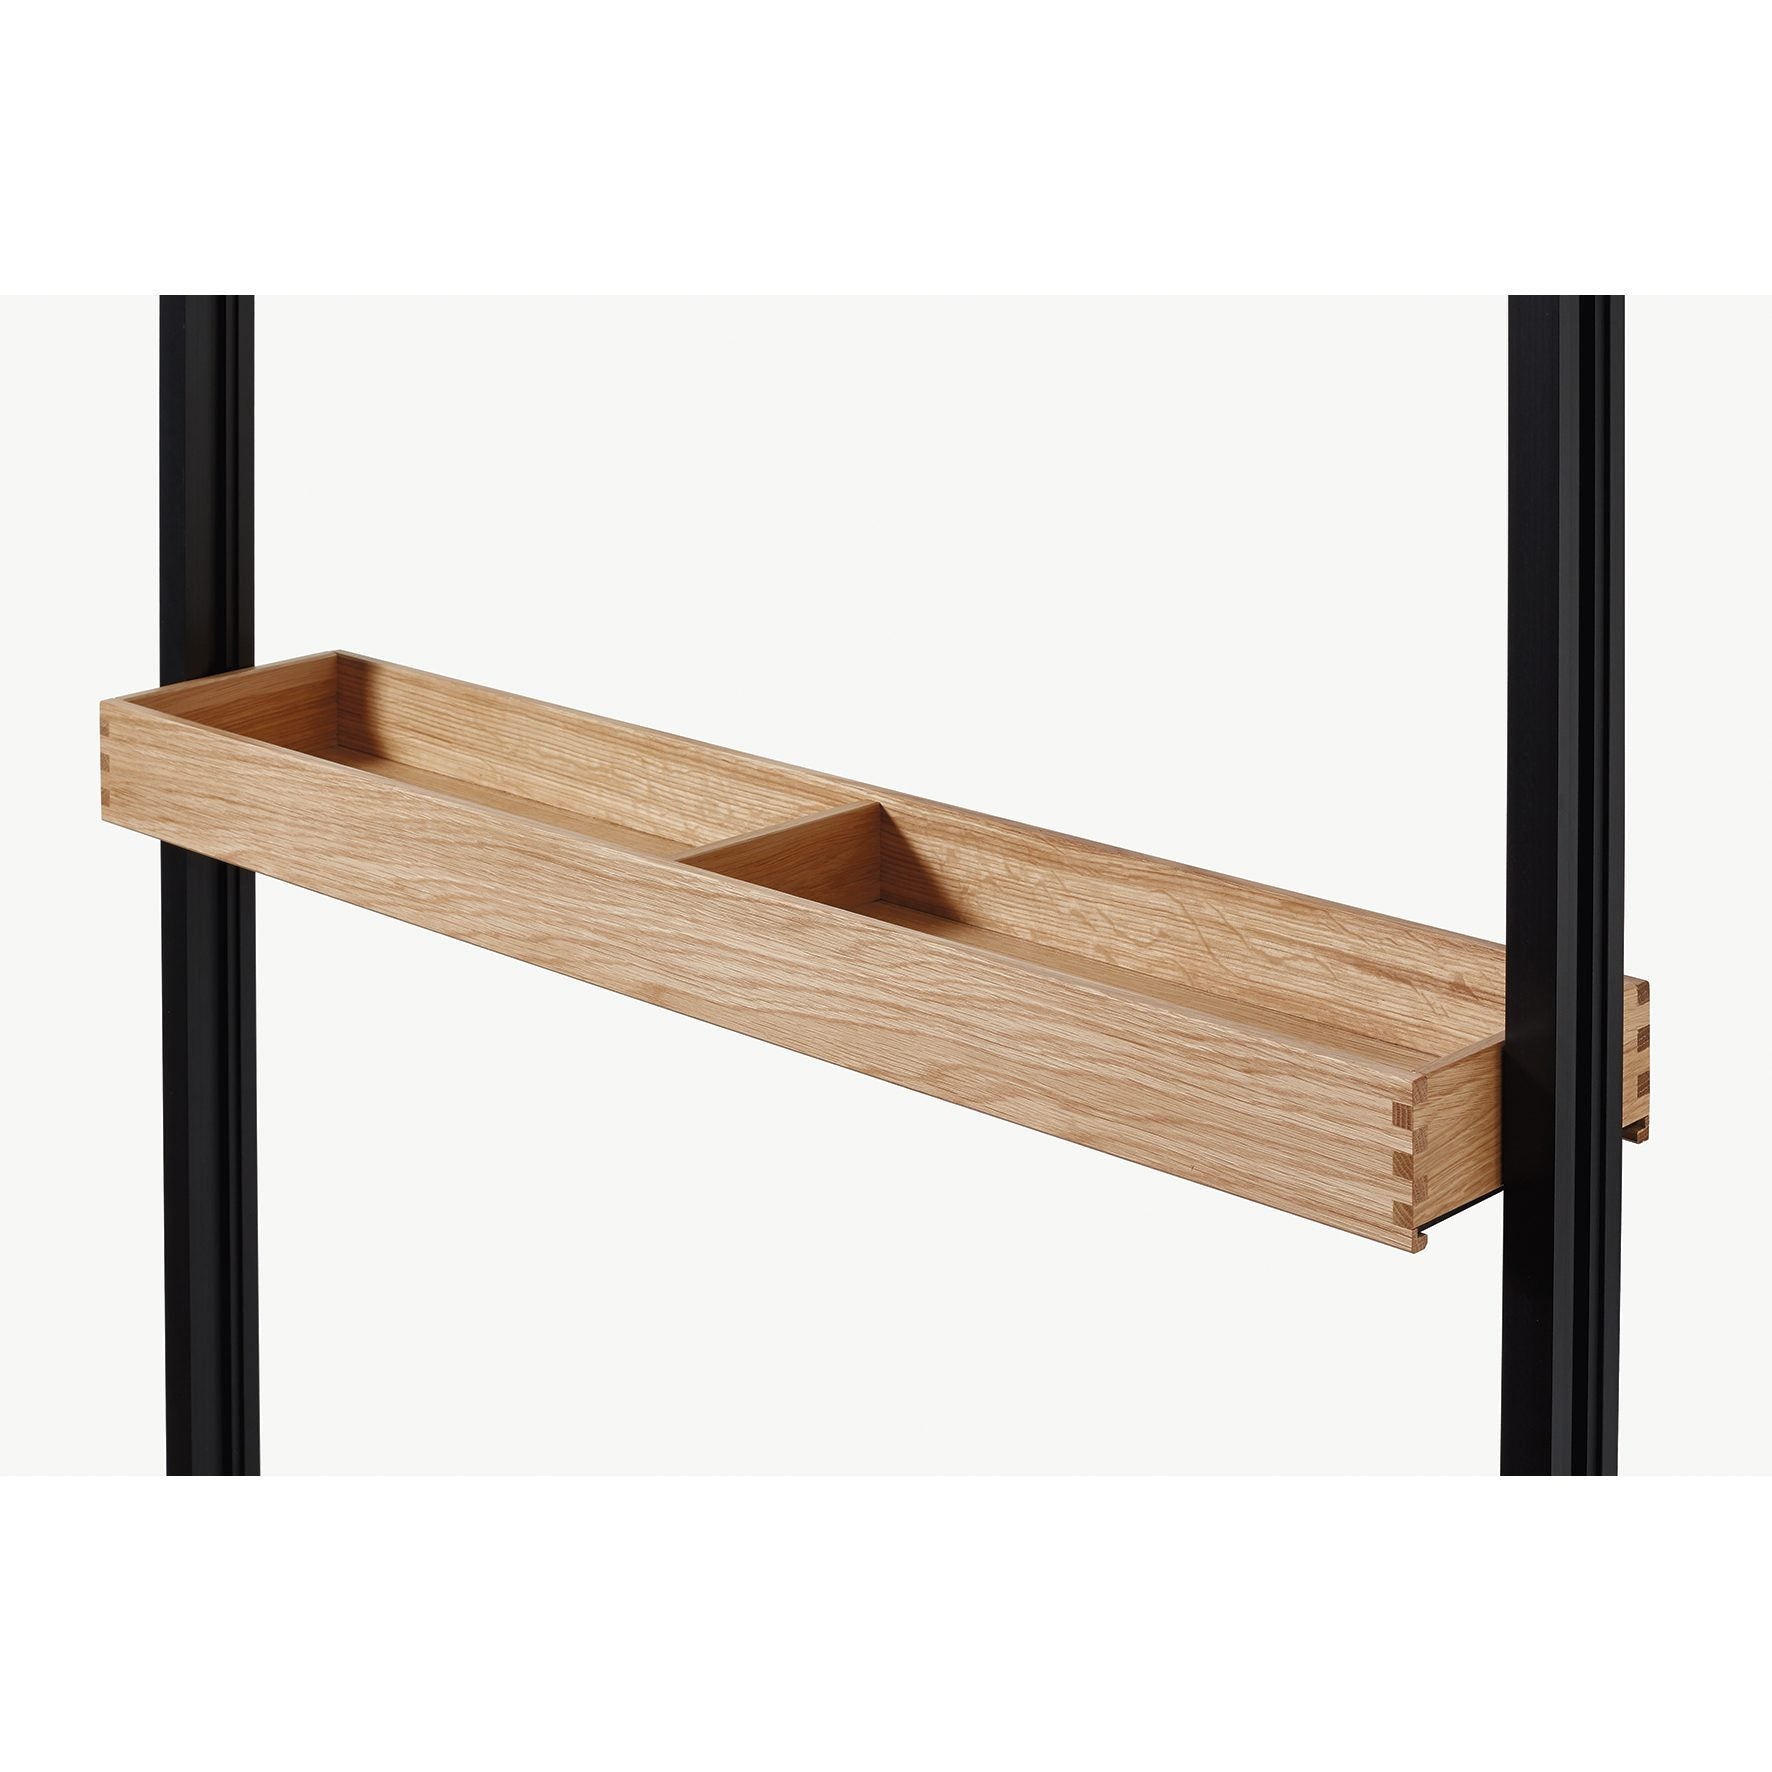 Nobilia Shallow wooden box for pole- mounted shelving system 70 mm high  RSHK60-F 60 cm 